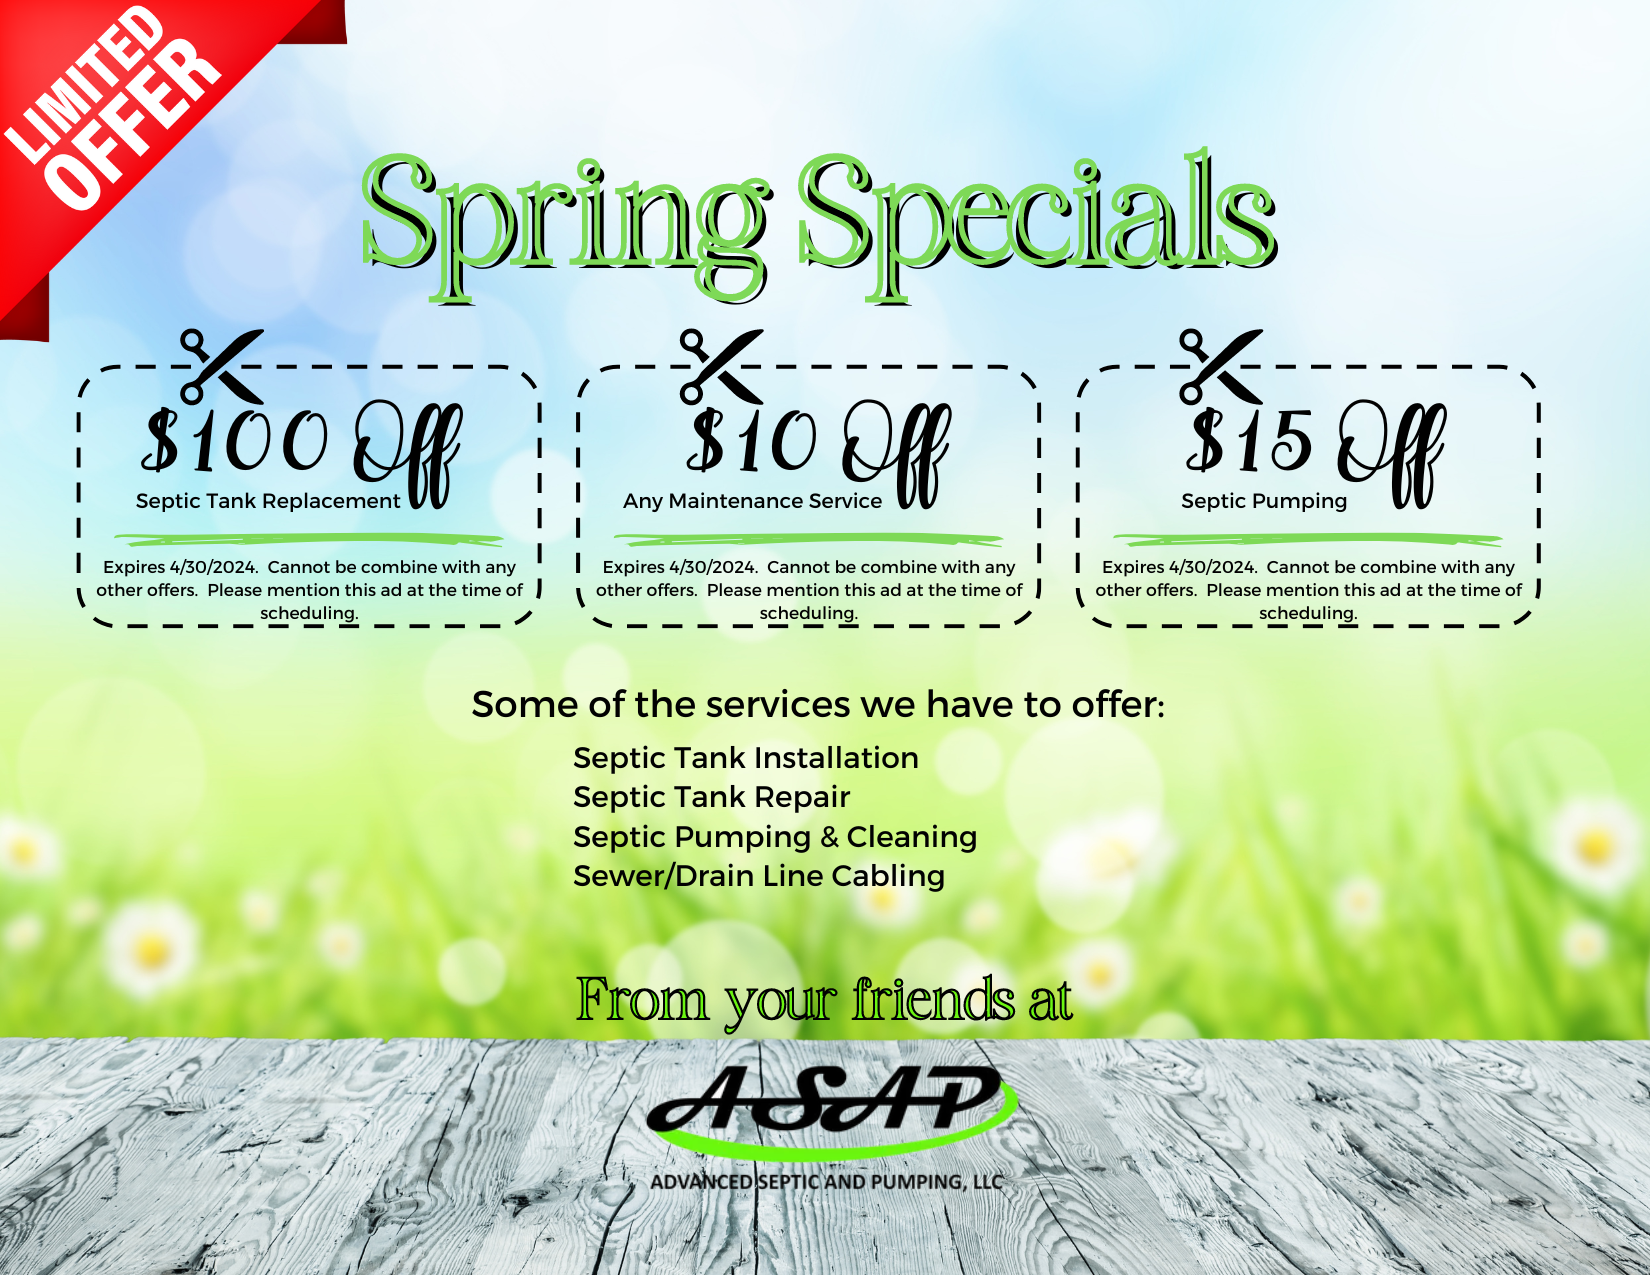 a limited offer for winter specials from asap